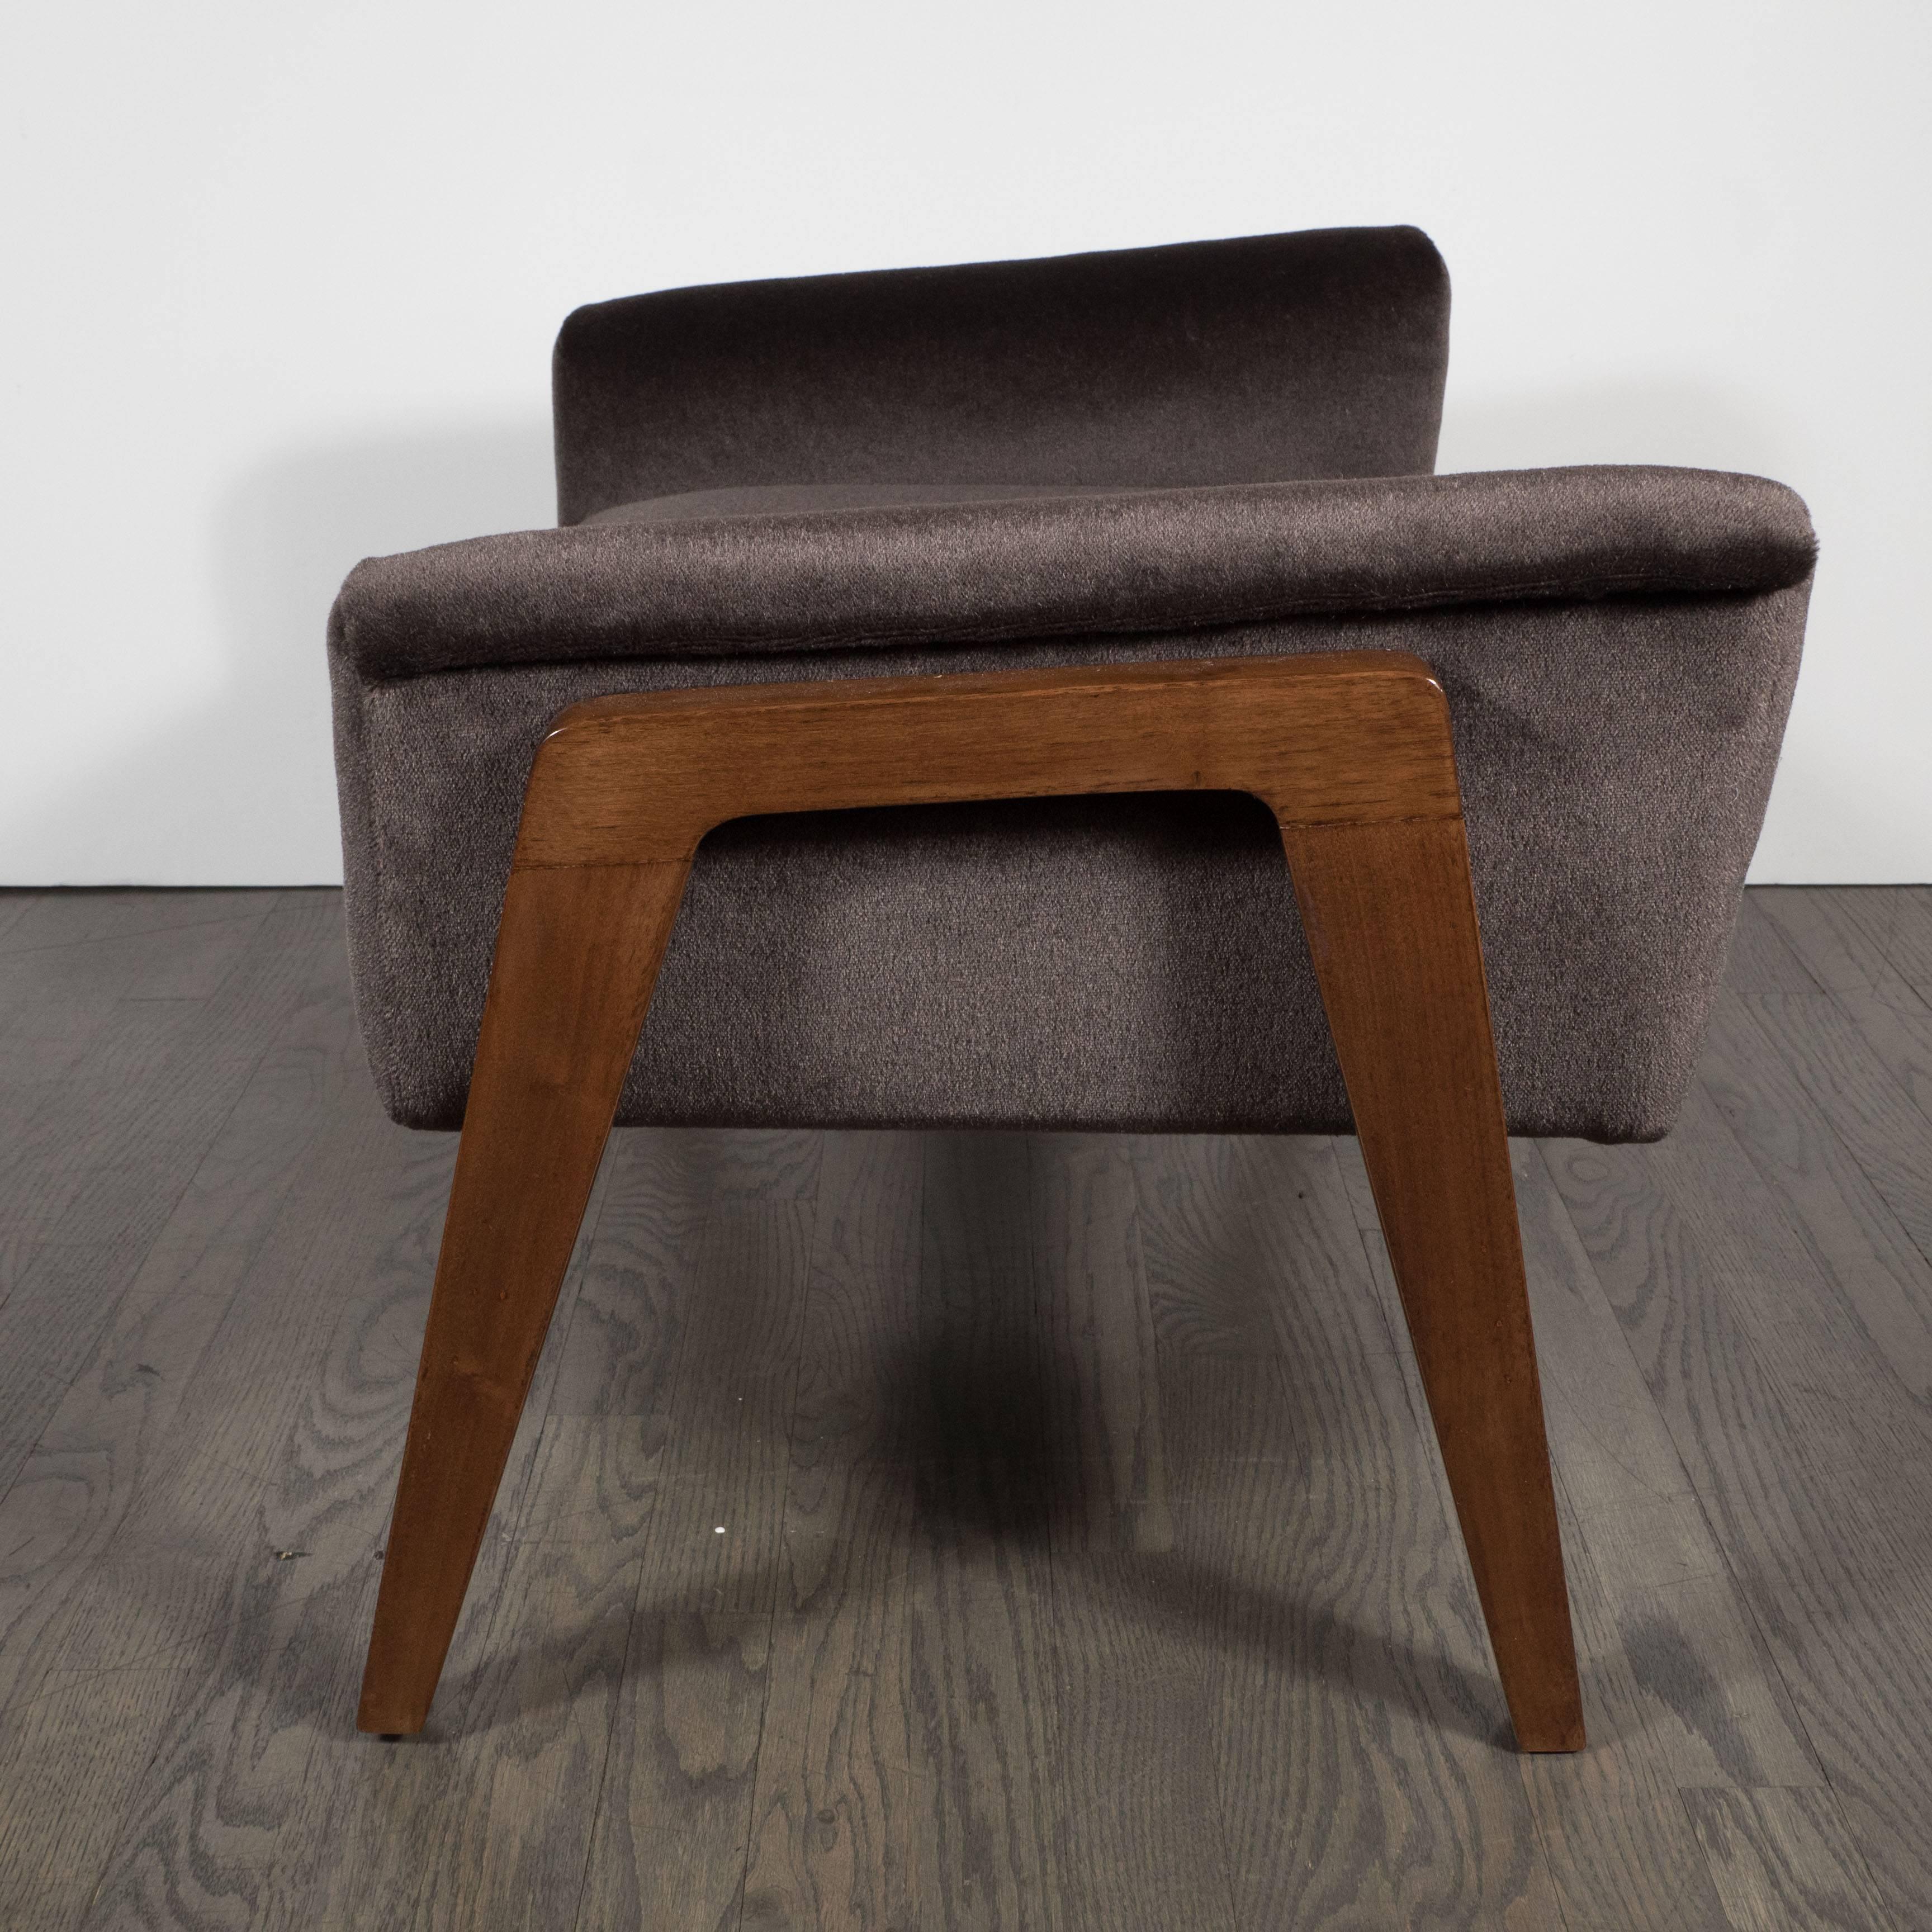 Mid-Century Modern Mid-Century Bench /Foot Stool in Chocolate Mohair and Hand-Rubbed Walnut